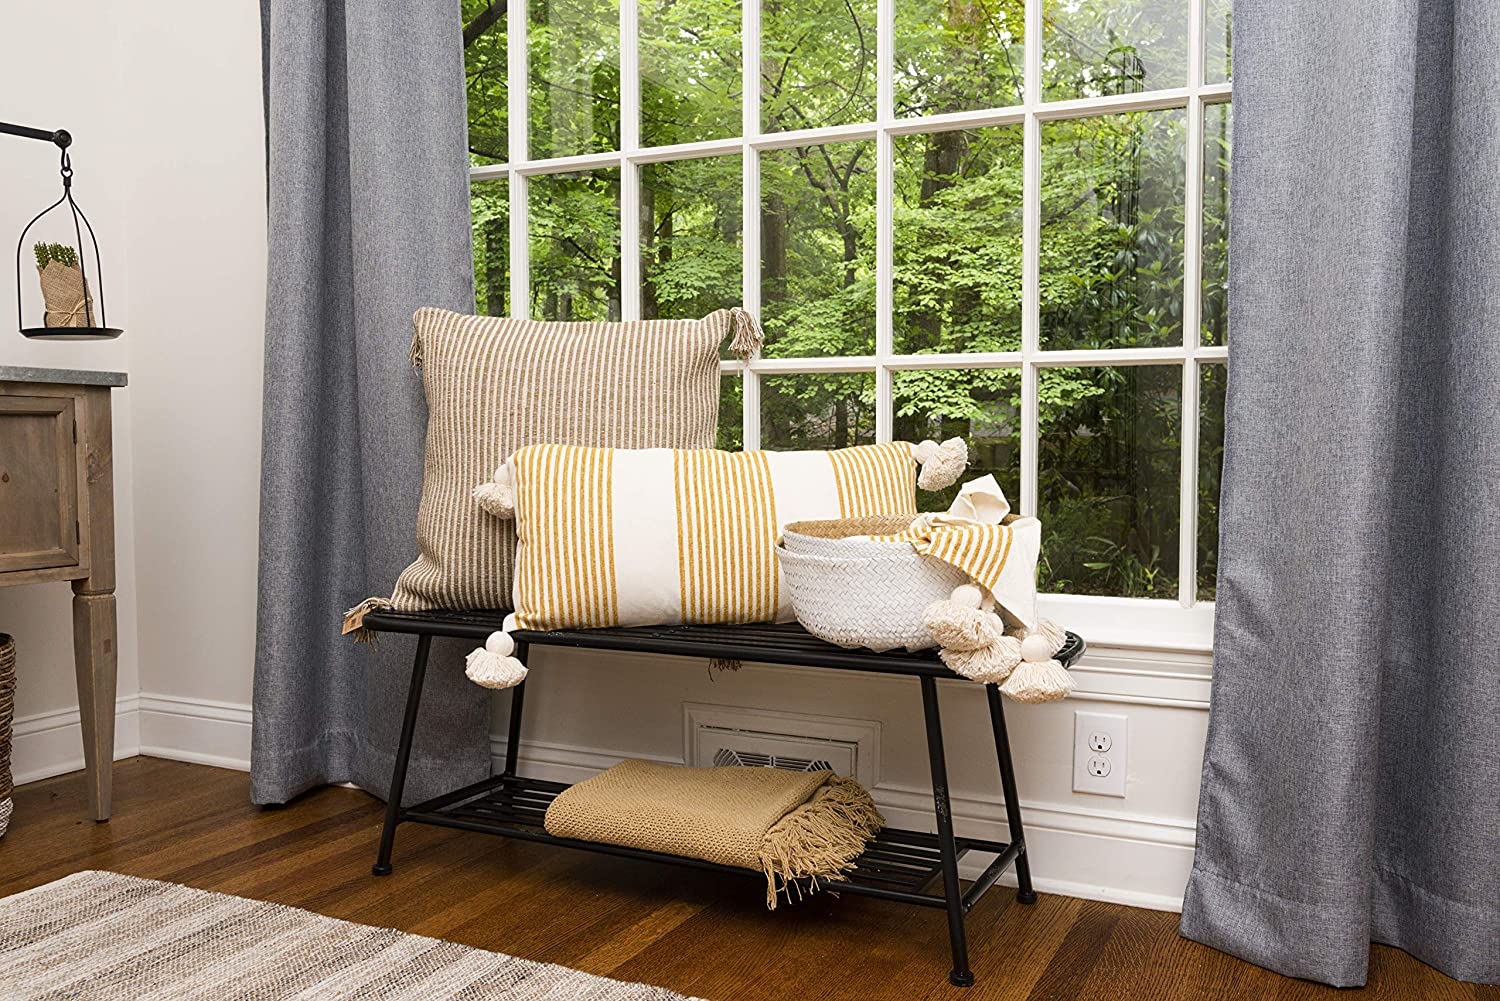 Cream Cotton & Chenille Pillow with Vertical Mustard Stripes, Tassels & Solid Cream Back - Image 6